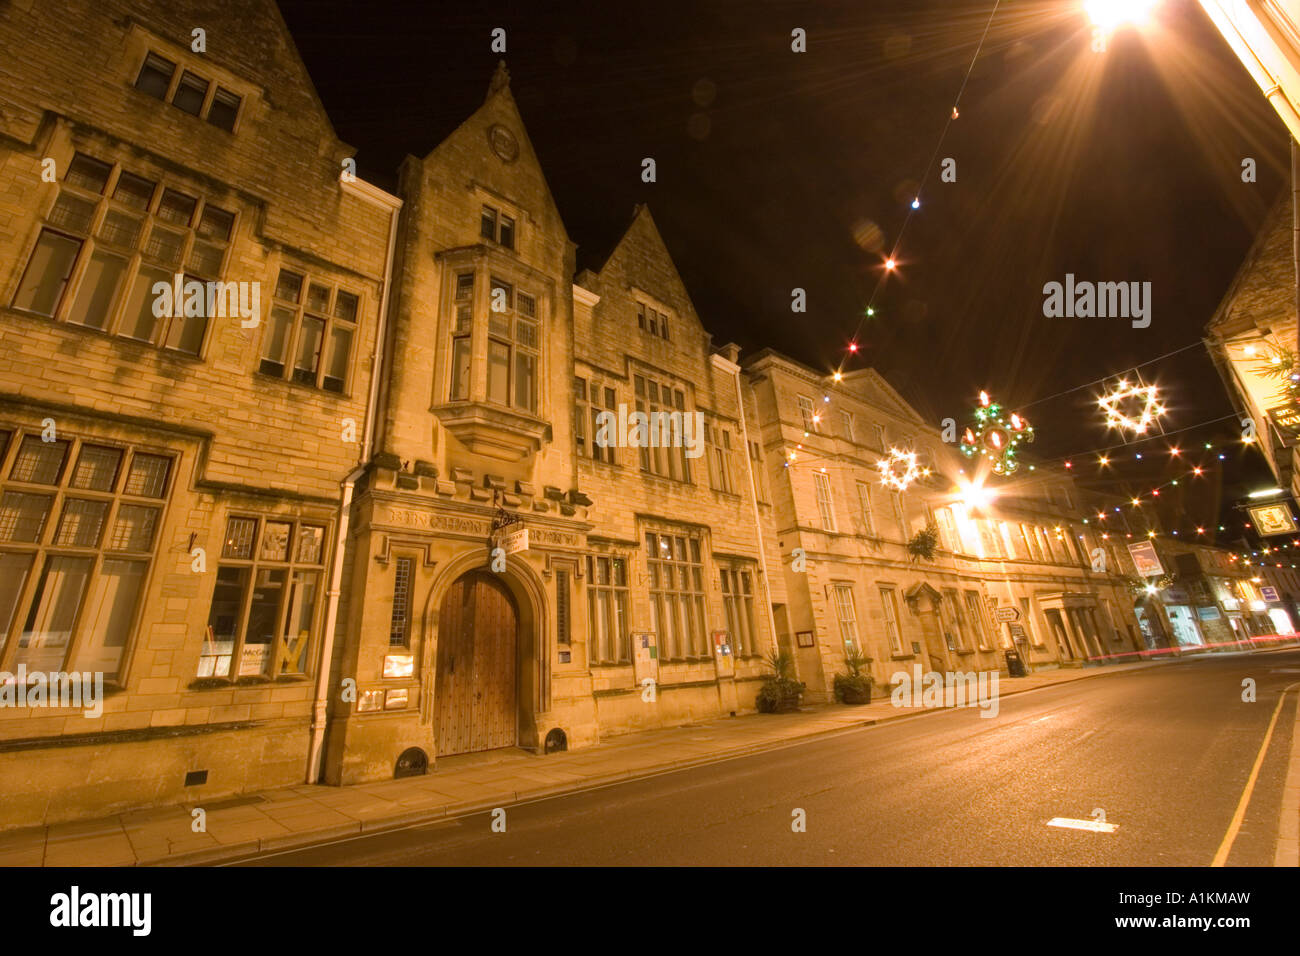 Cirencester high street with Christmas lights and decorations Stock Photo